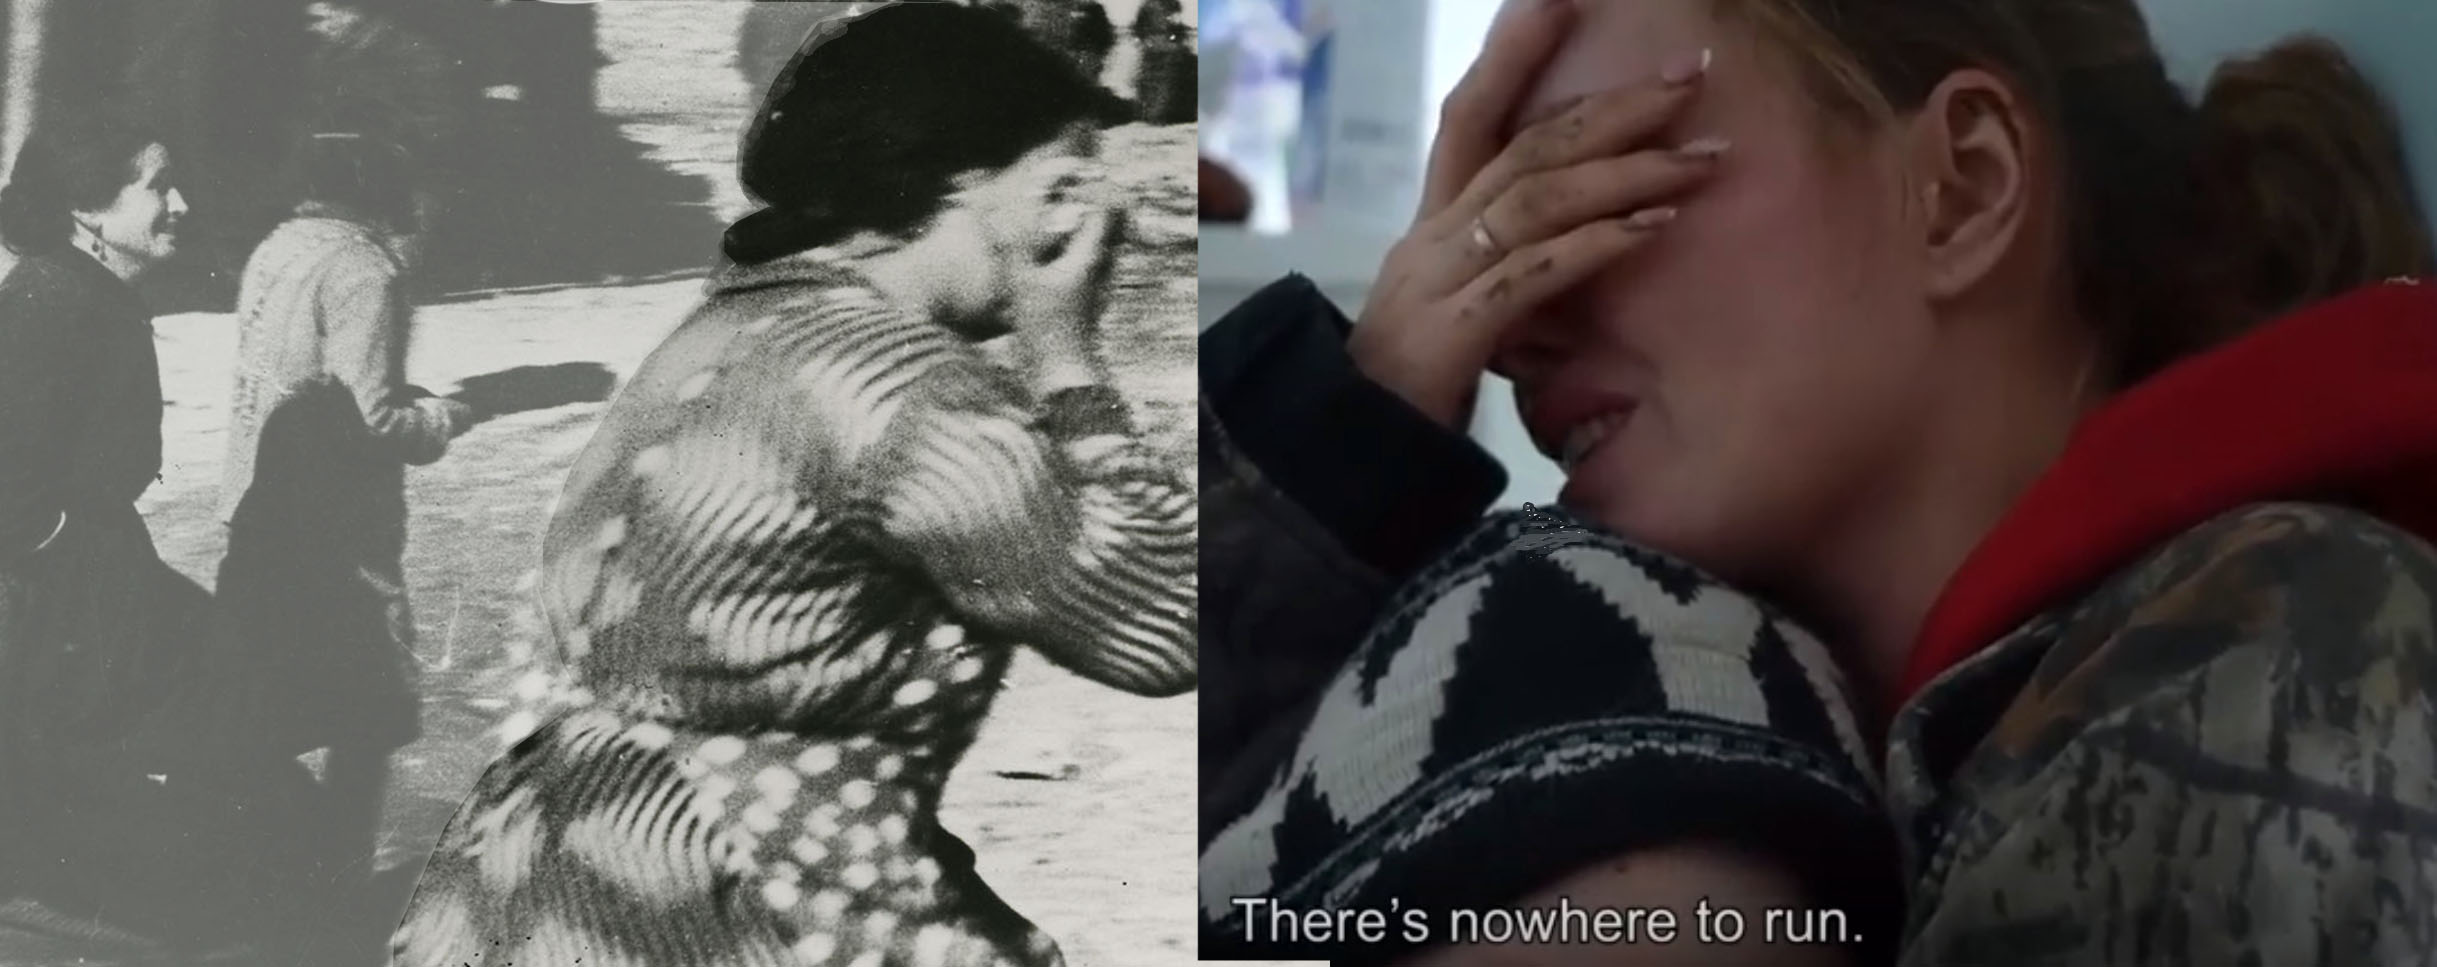 Oscar Winning '20 Days in Mariupol' (2023) and Ivens's '40 Days in Madrid' (1937)